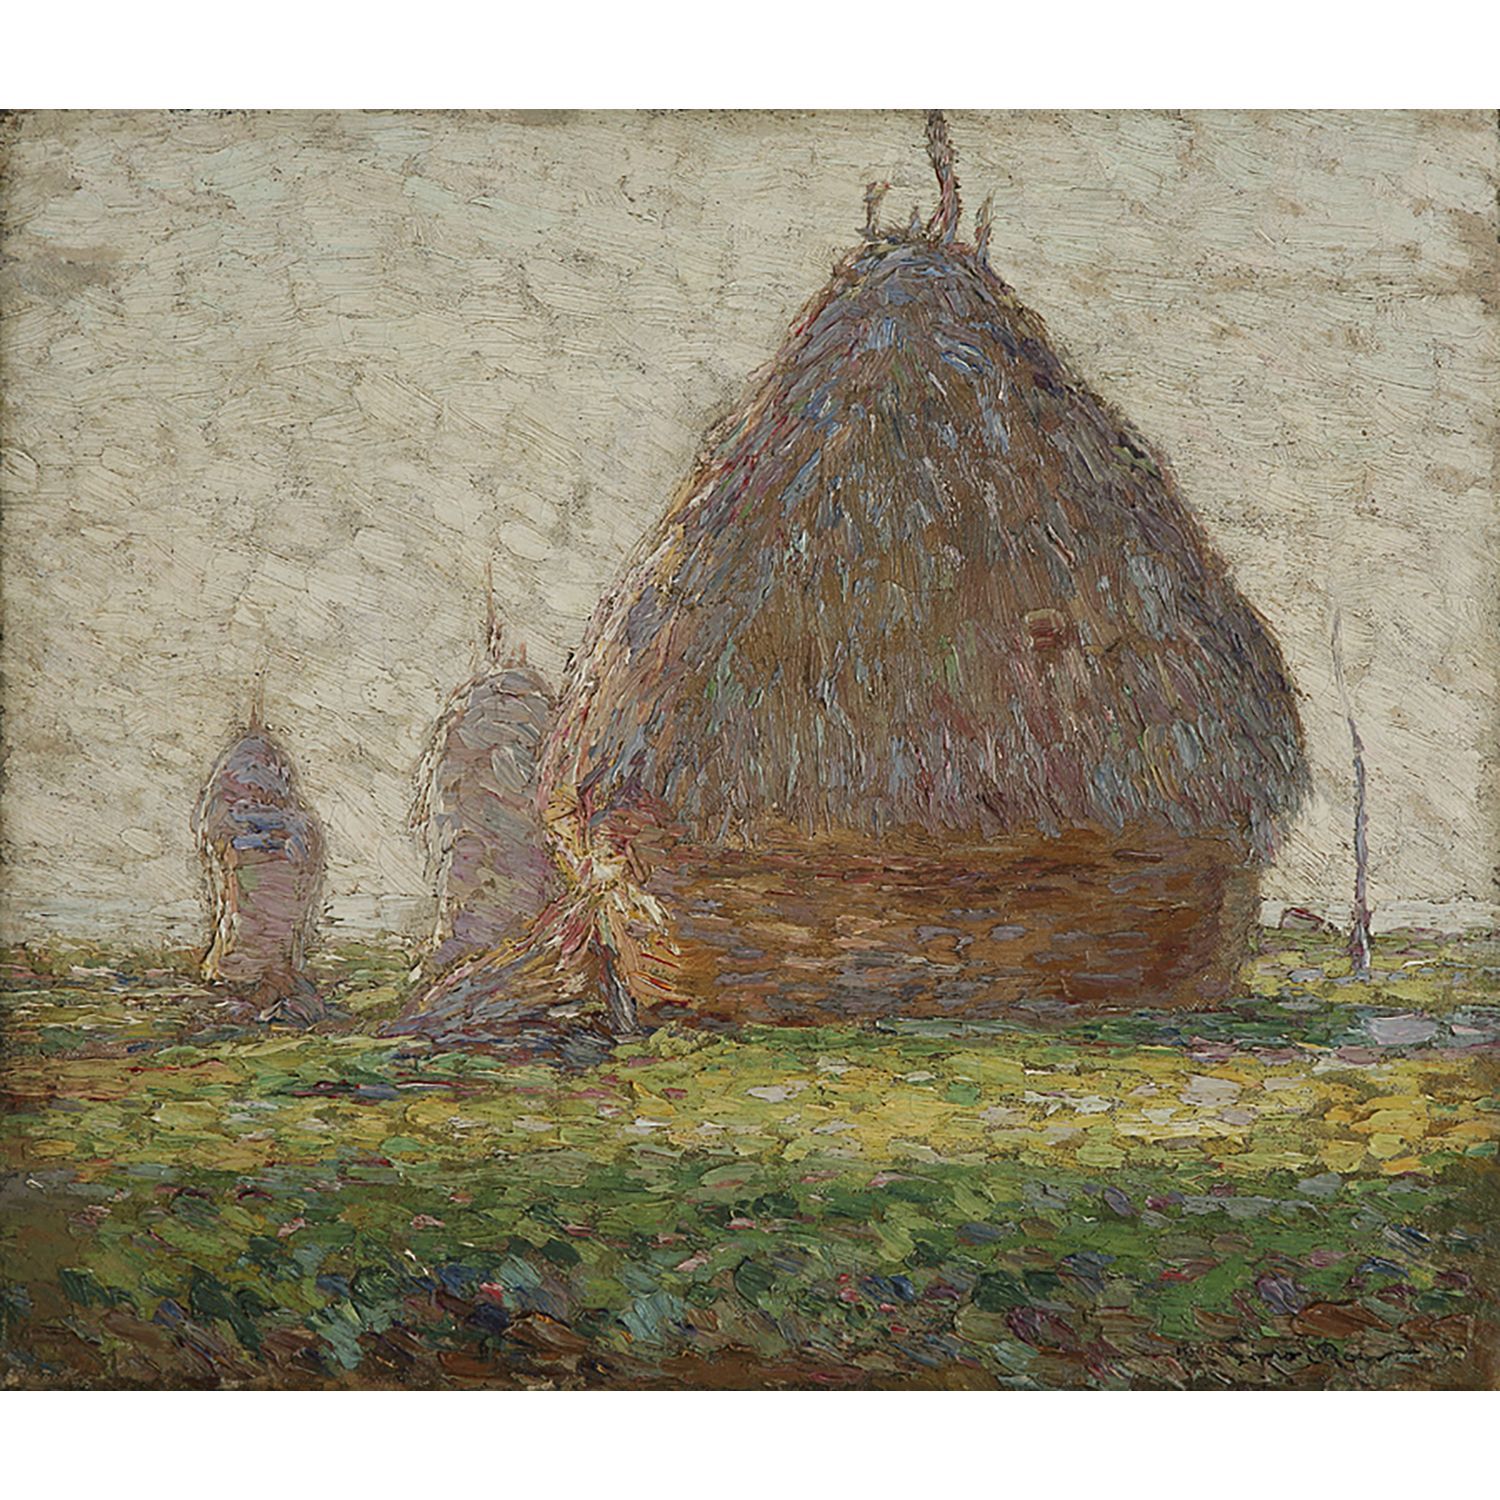 Null GINO ROMITI (1881-1967)

THE HAYSTACKS 

Oil on canvas 

Signed lower right&hellip;